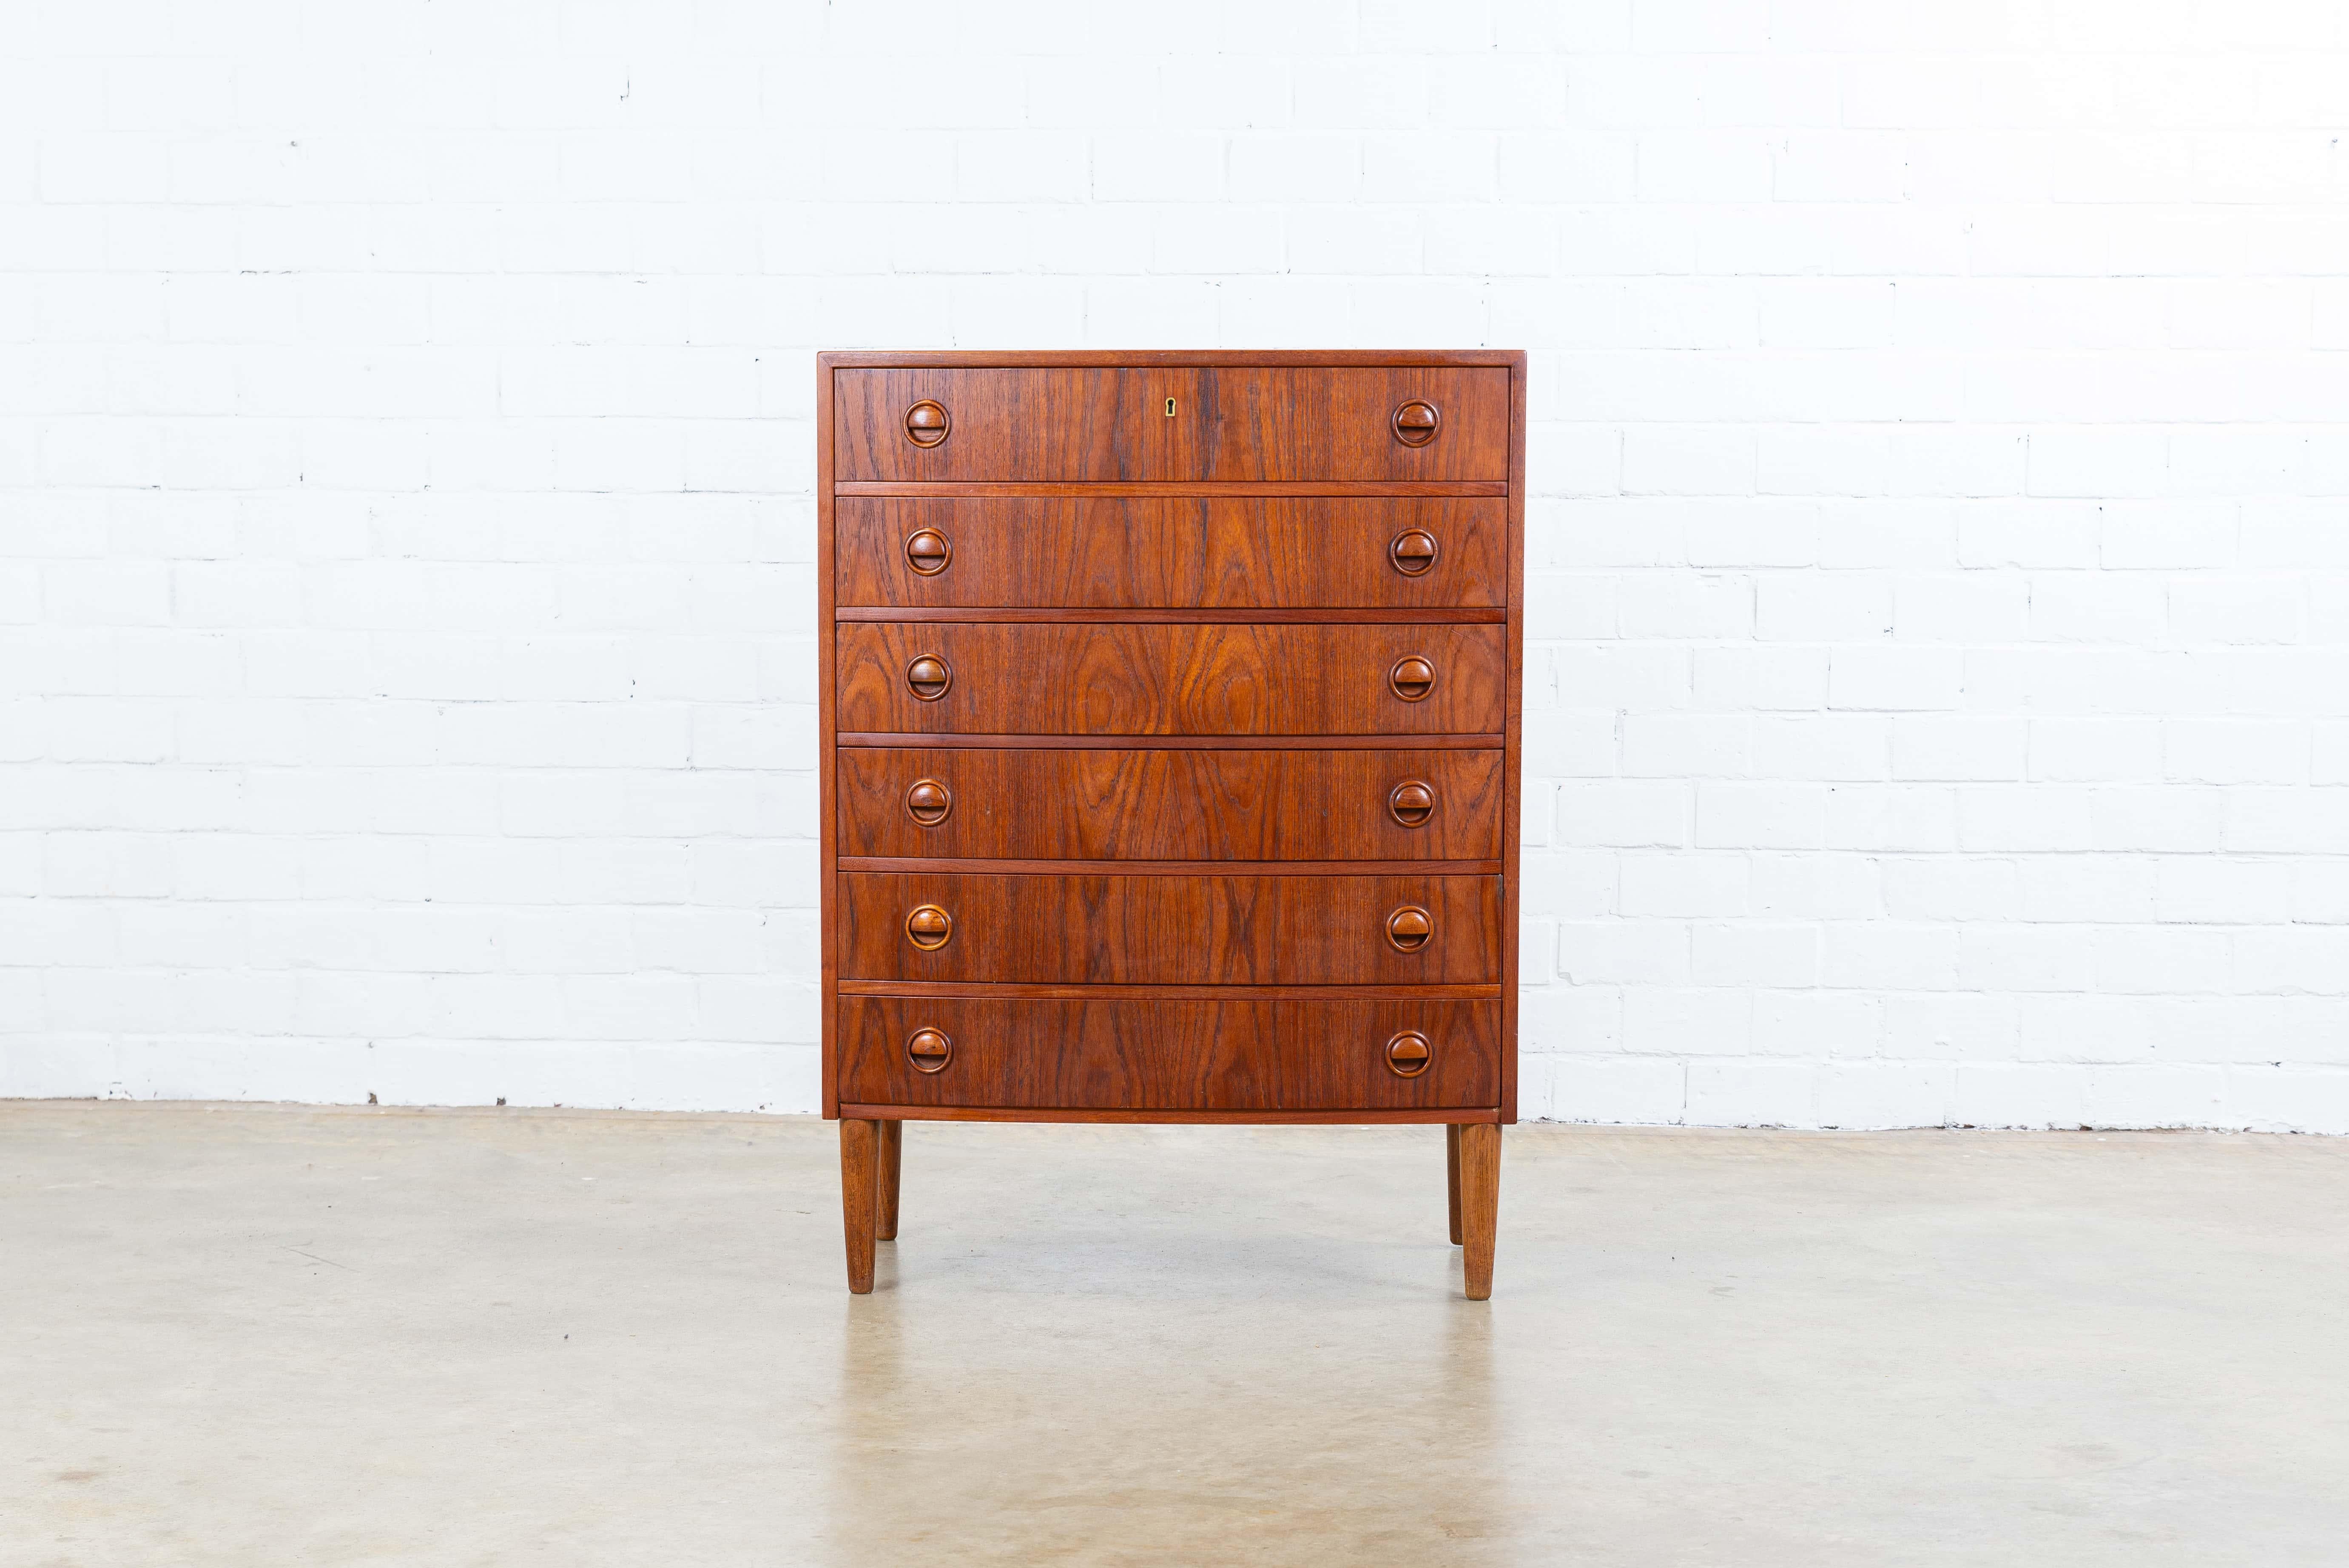 Beautiful chest of drawers in teak with 6 large drawers.
This chest of drawers was designed by Kai Kristiansen in Denmark in the 1960s.